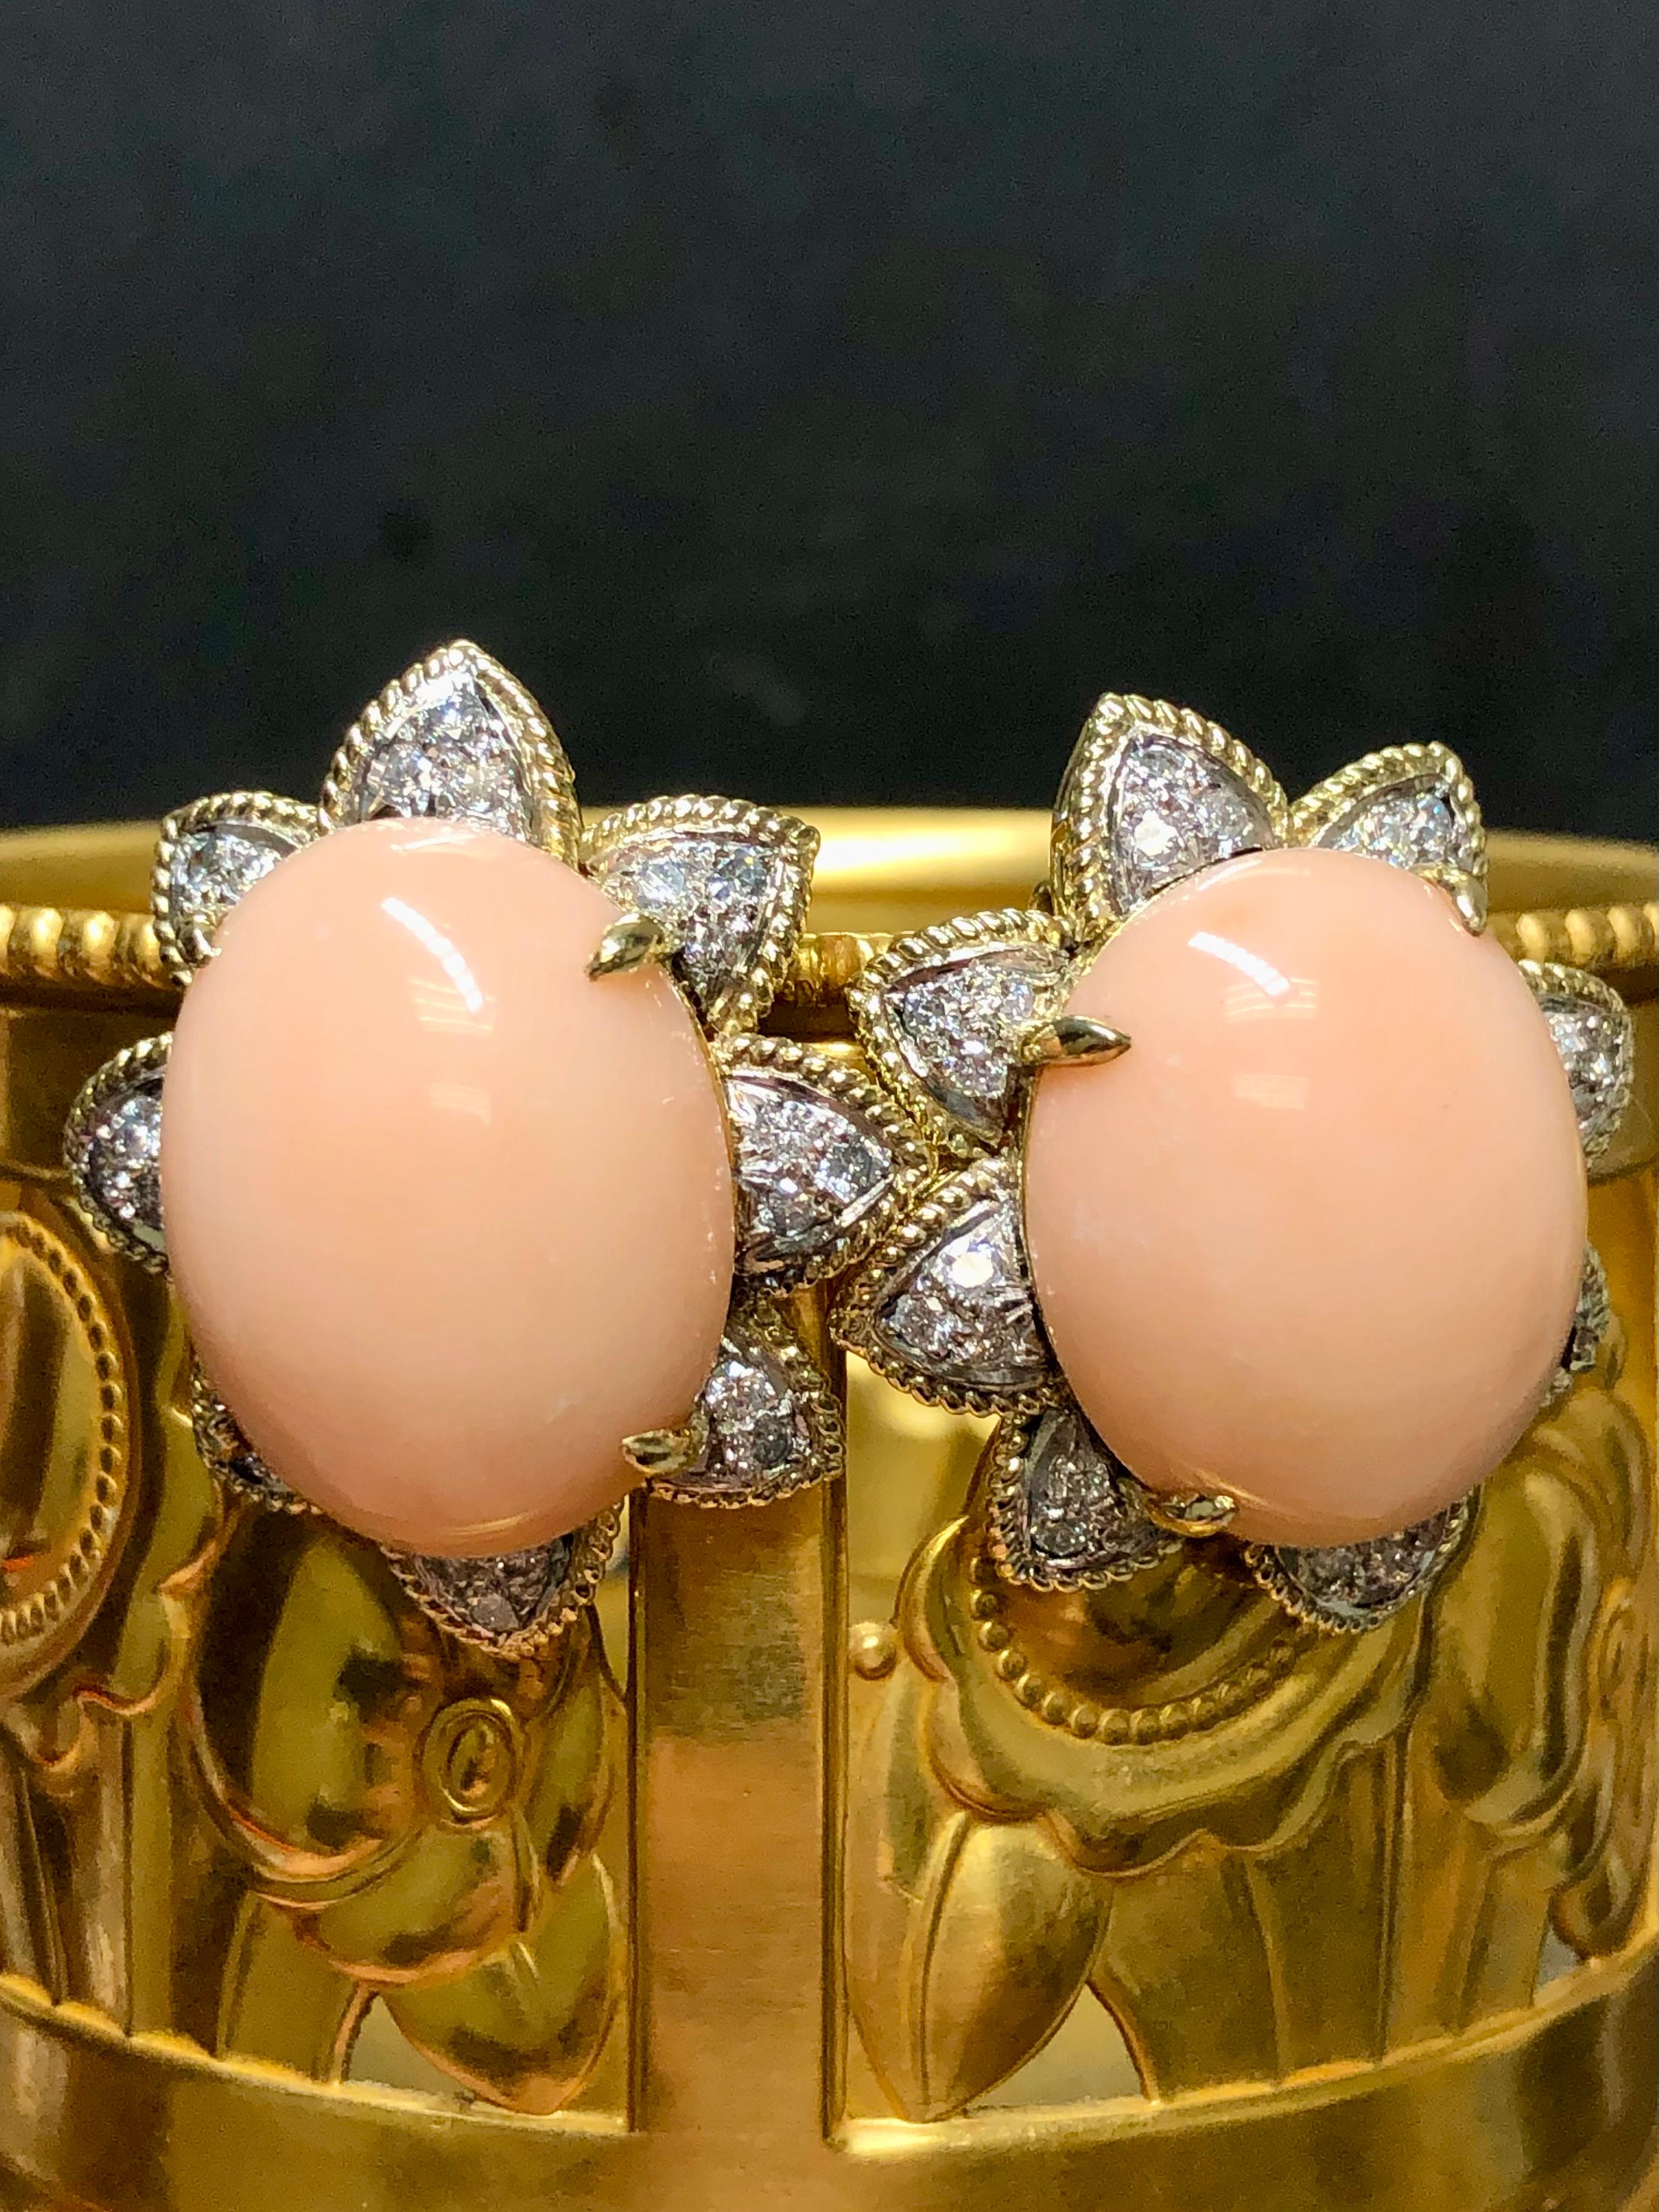 A vintage pair of earrings c. 1960’s done in 18K and centered by large oval coral cabochons (22mm x 17.4m) surrounded by approximately .96cttw in G-I color Va1-SI1 round diamonds. Posts can be added for pierced ears. Classic 60’s jewelry never goes